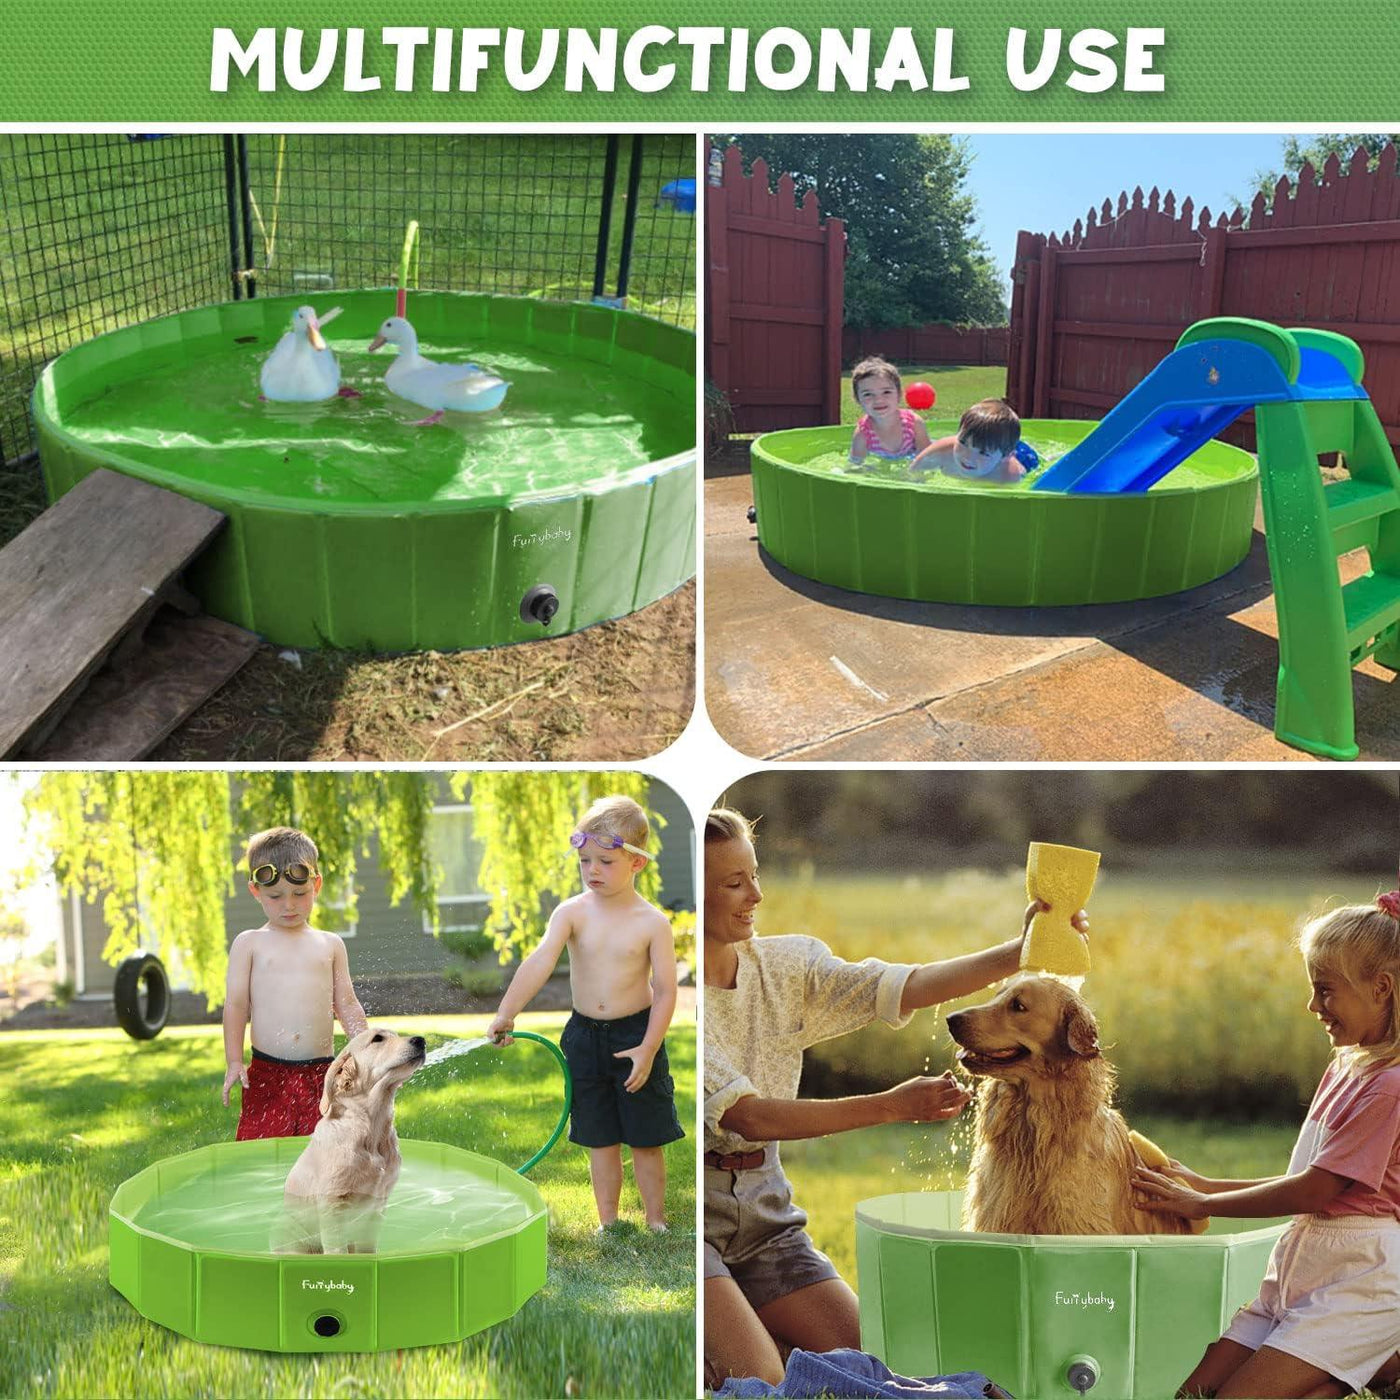 furrybaby Dog Pool, Durable Paddling Pool with Quick Drainage Hole, Foldable - Massive Discounts